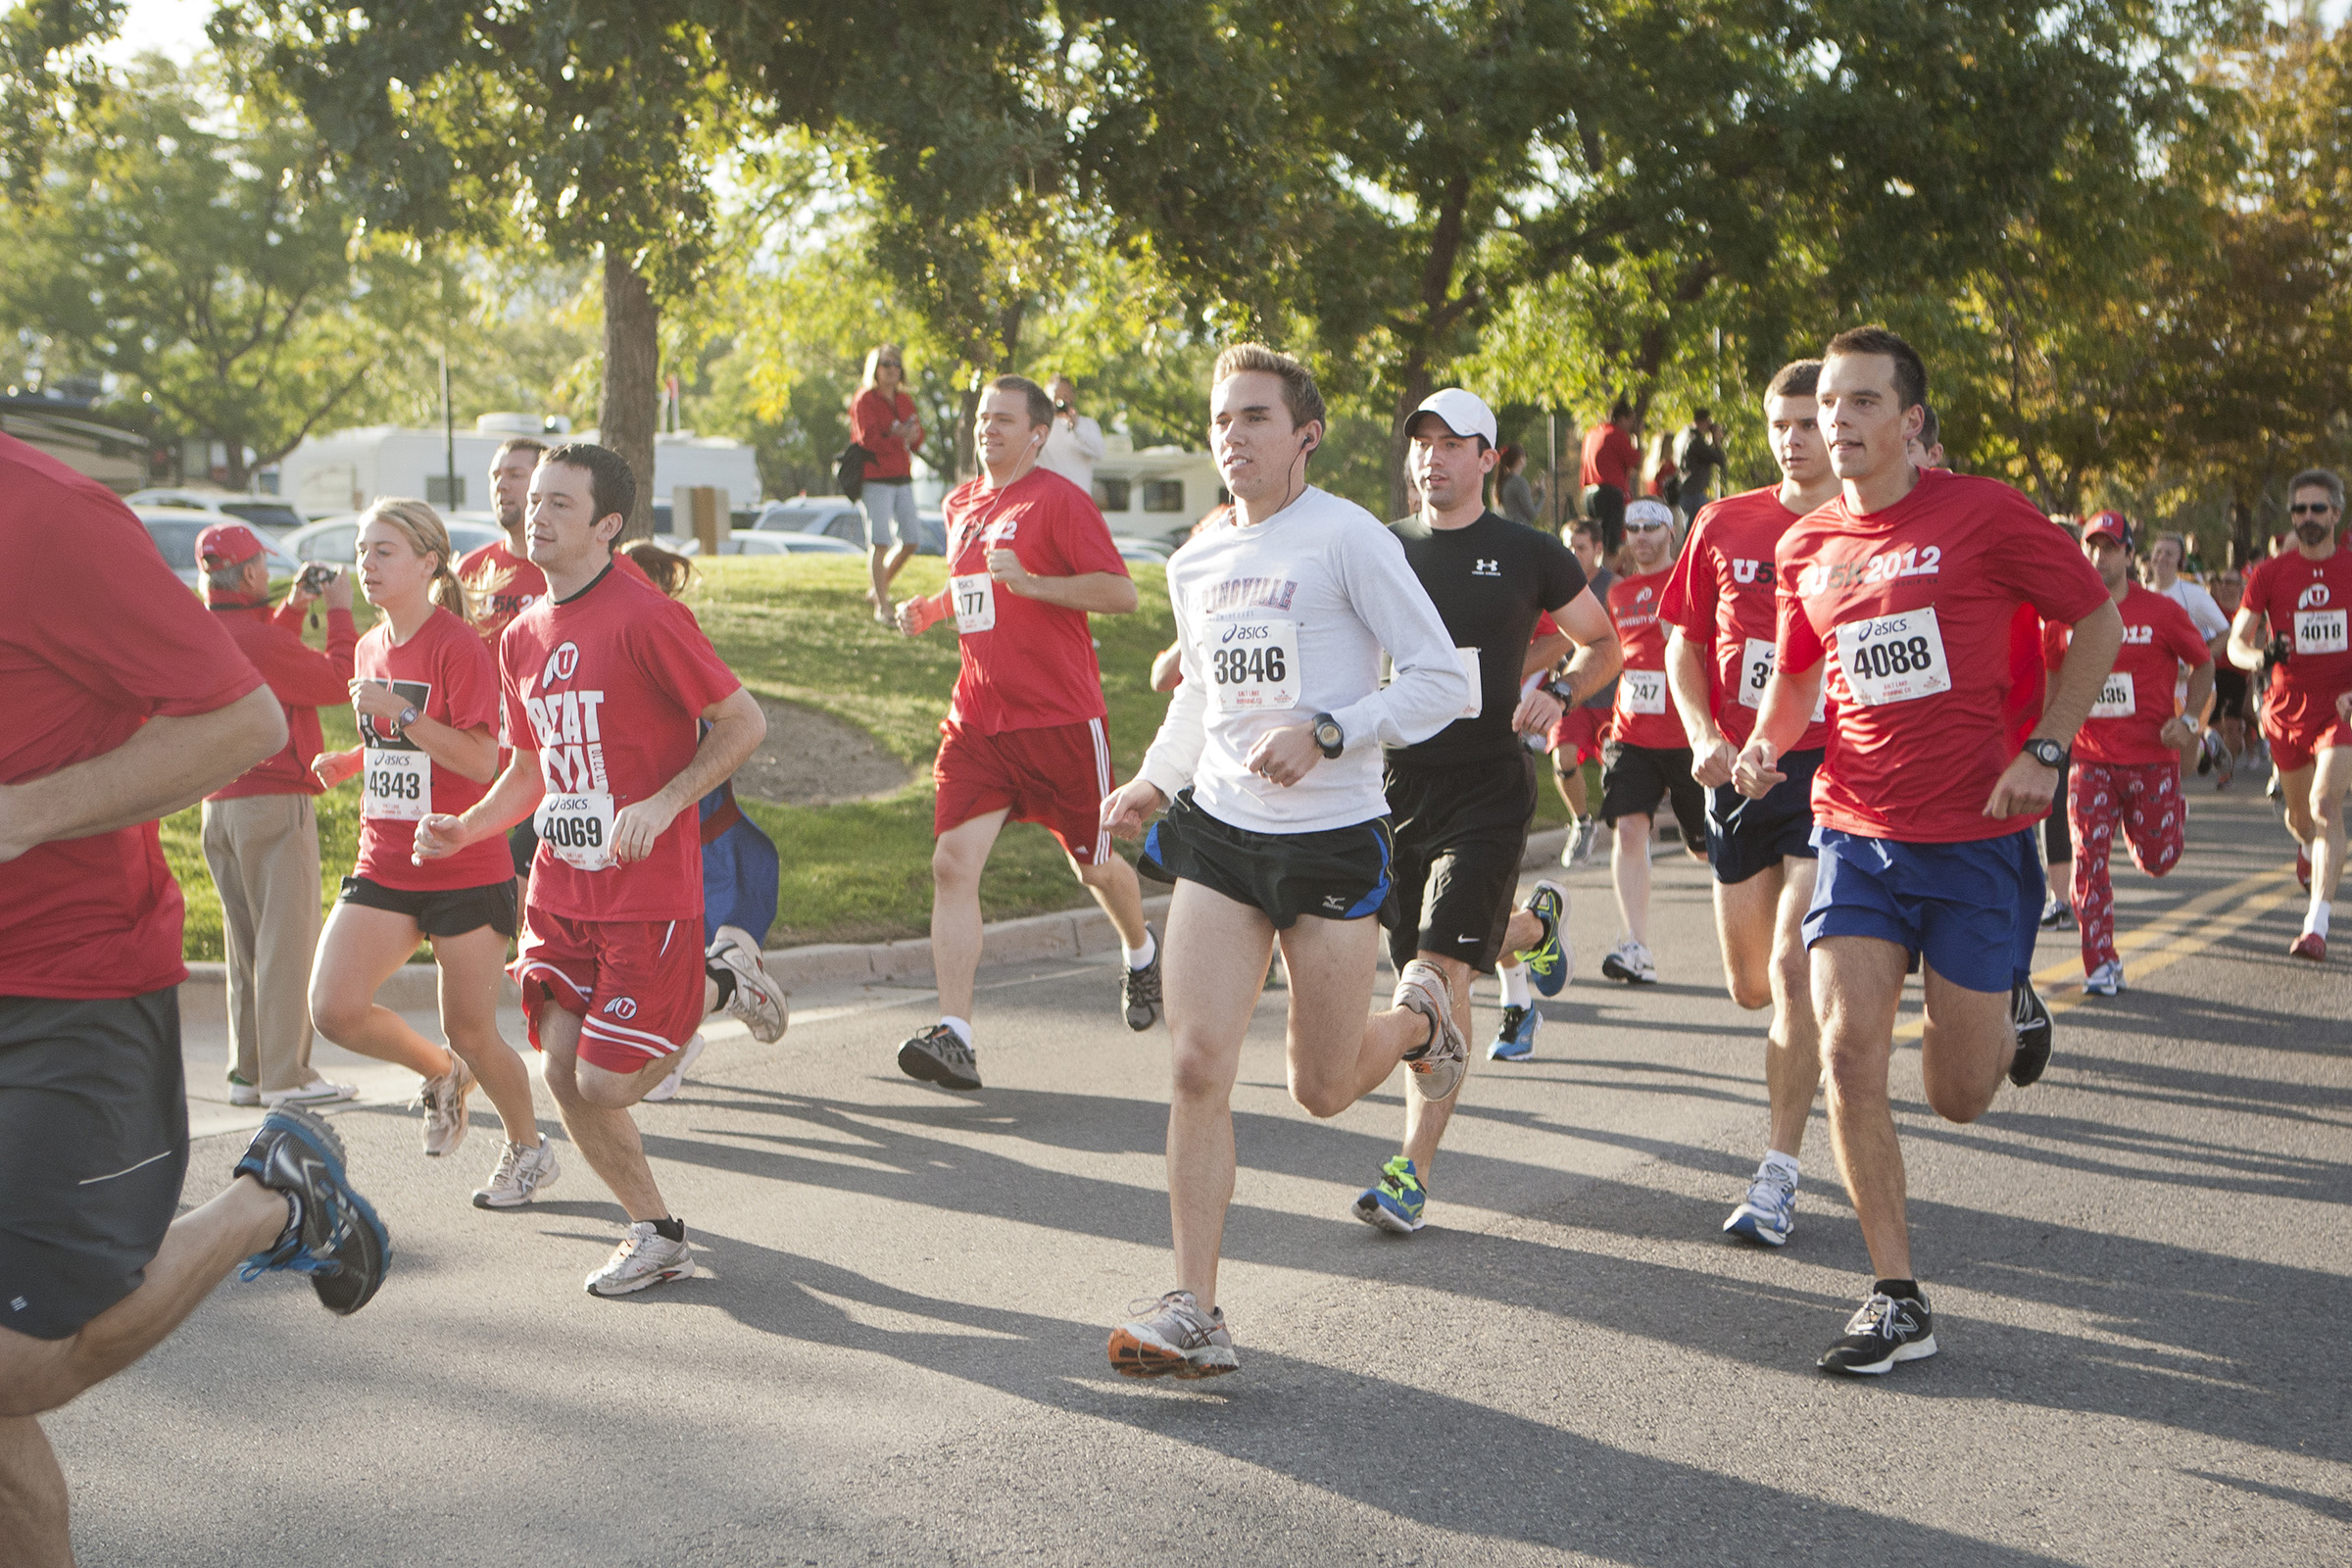 More than 600 participants are anticipated for this year’s Homecoming 5K which raises funds for student scholarships.